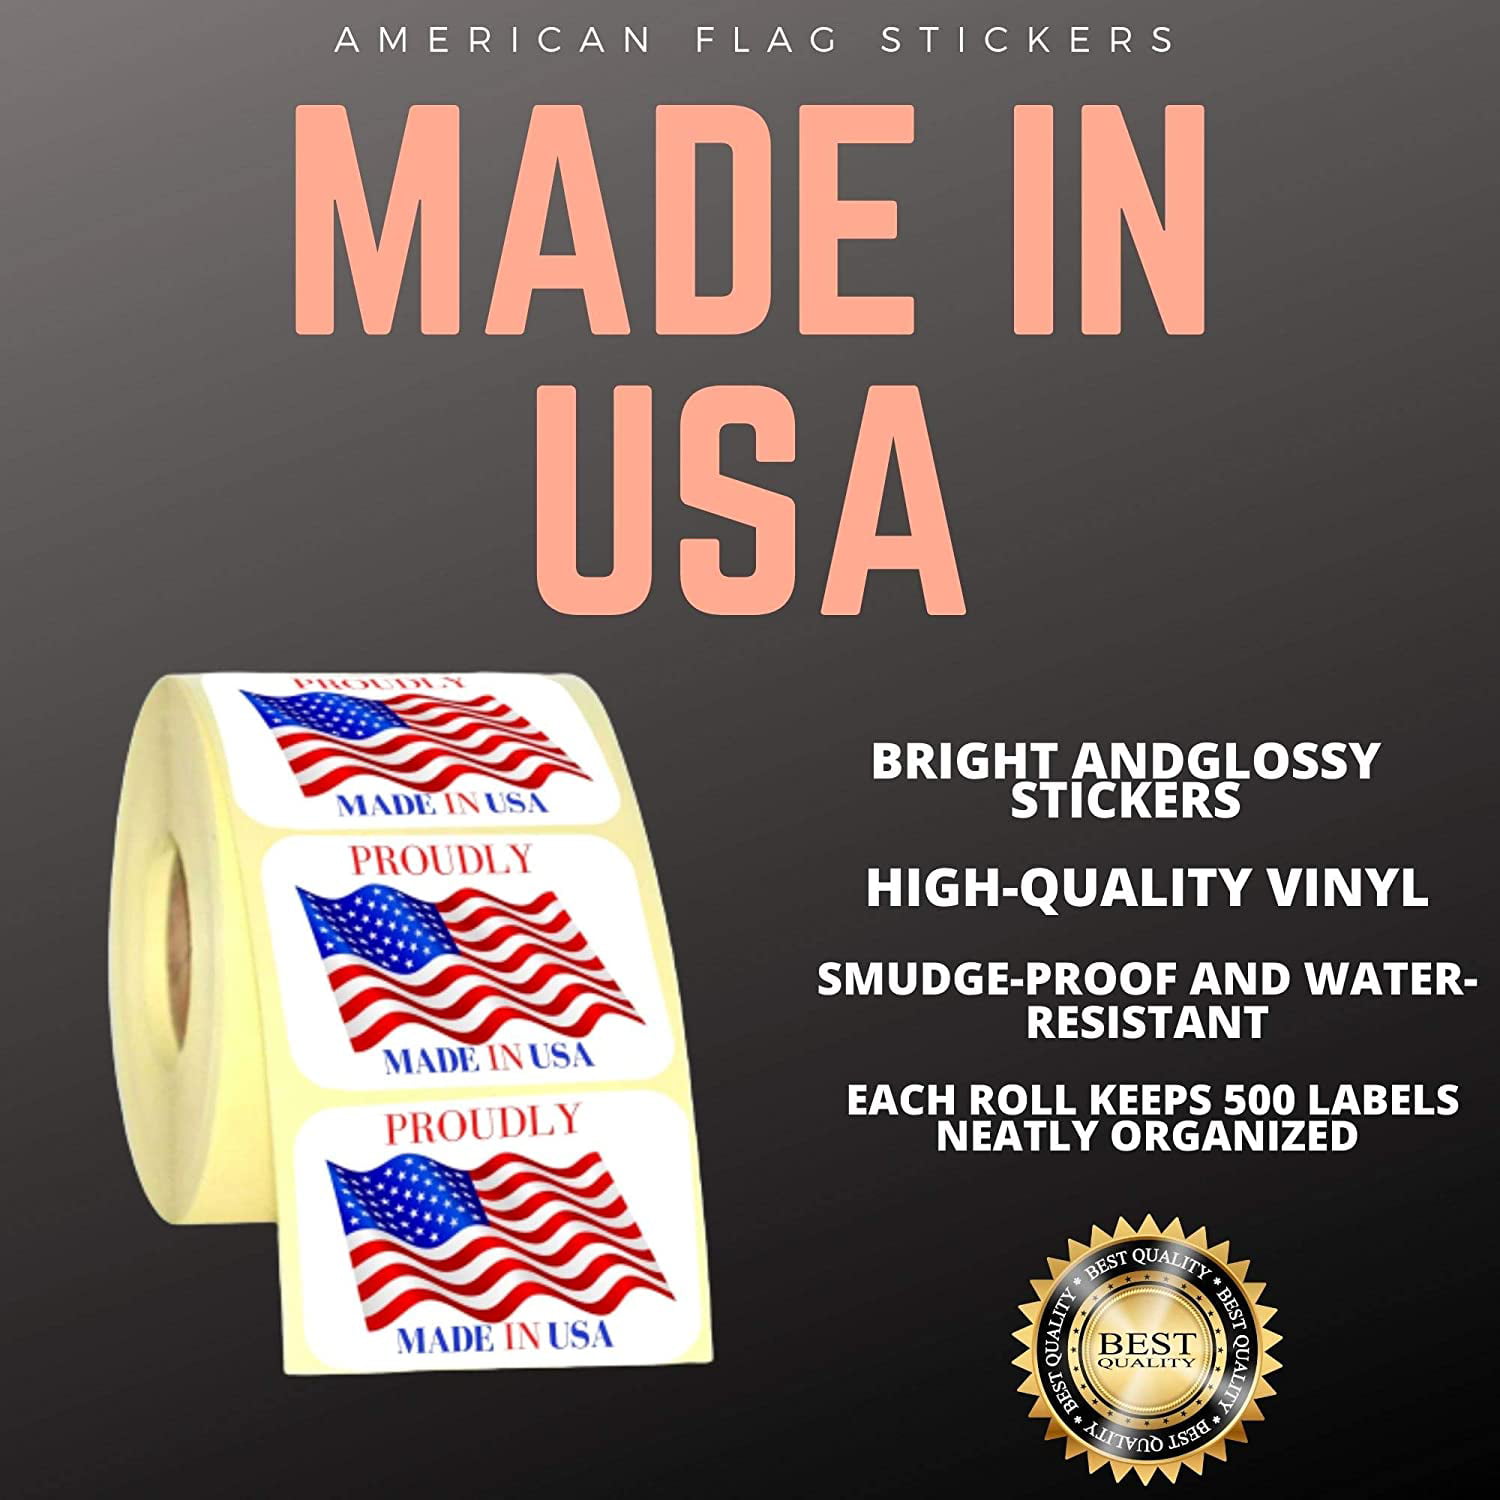 Details about   MADE IN USA Flag Pre-Printed Labels / Stickers 6 2" x 3" - Rolls of 500 